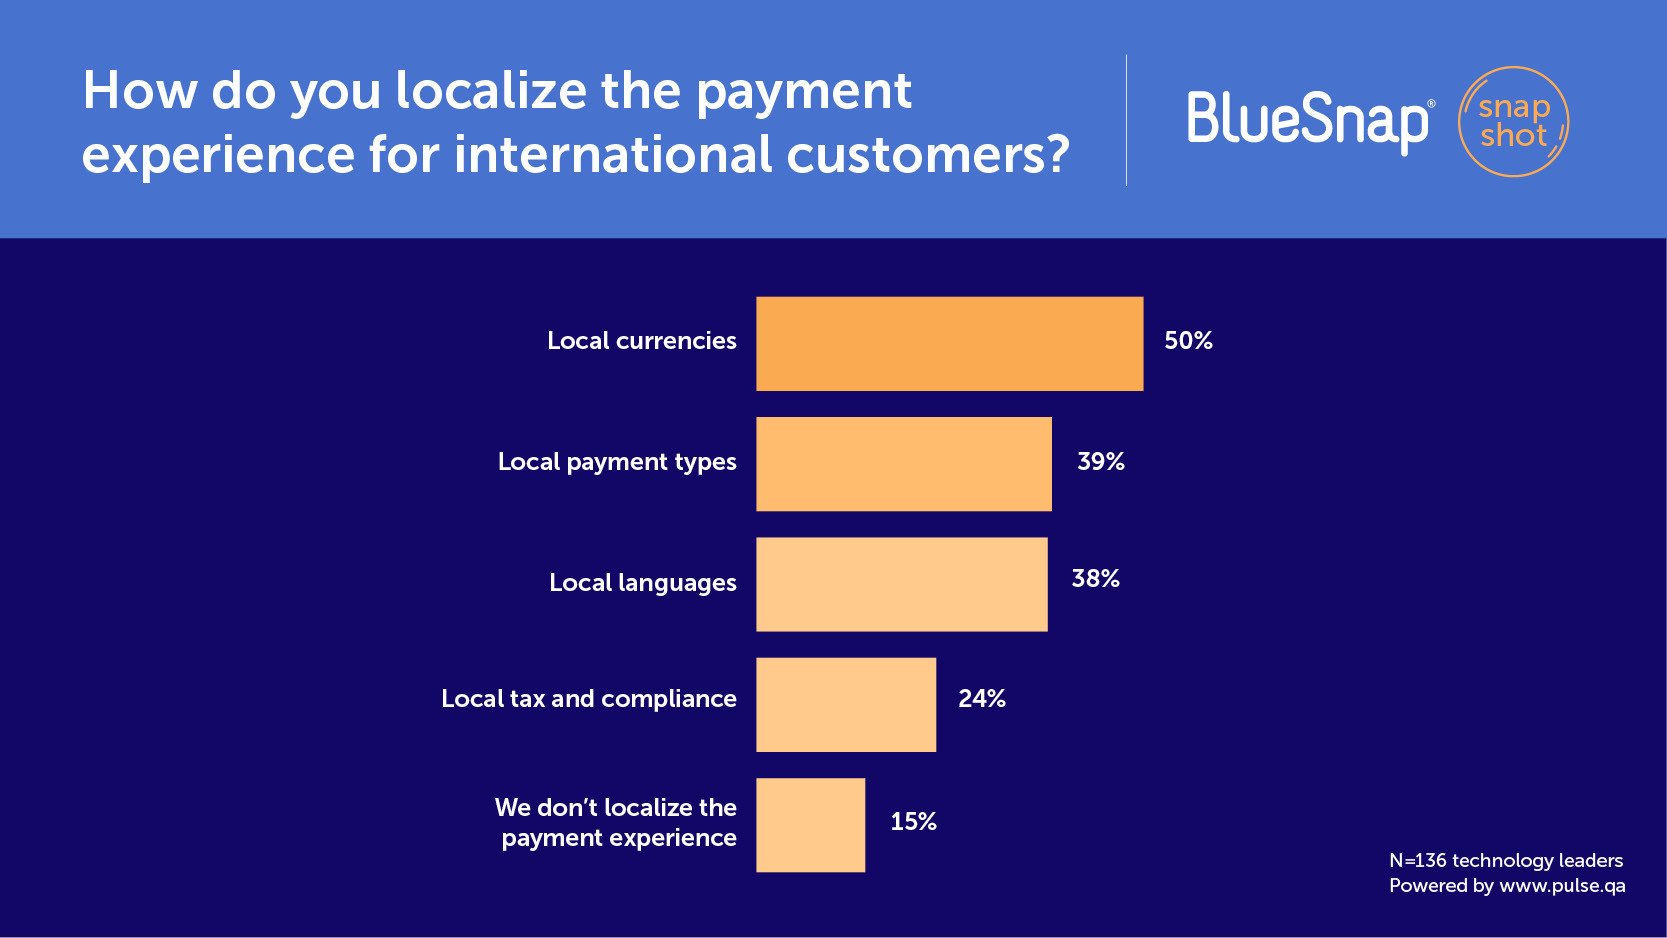 How do you localize the payment experience for international customers?